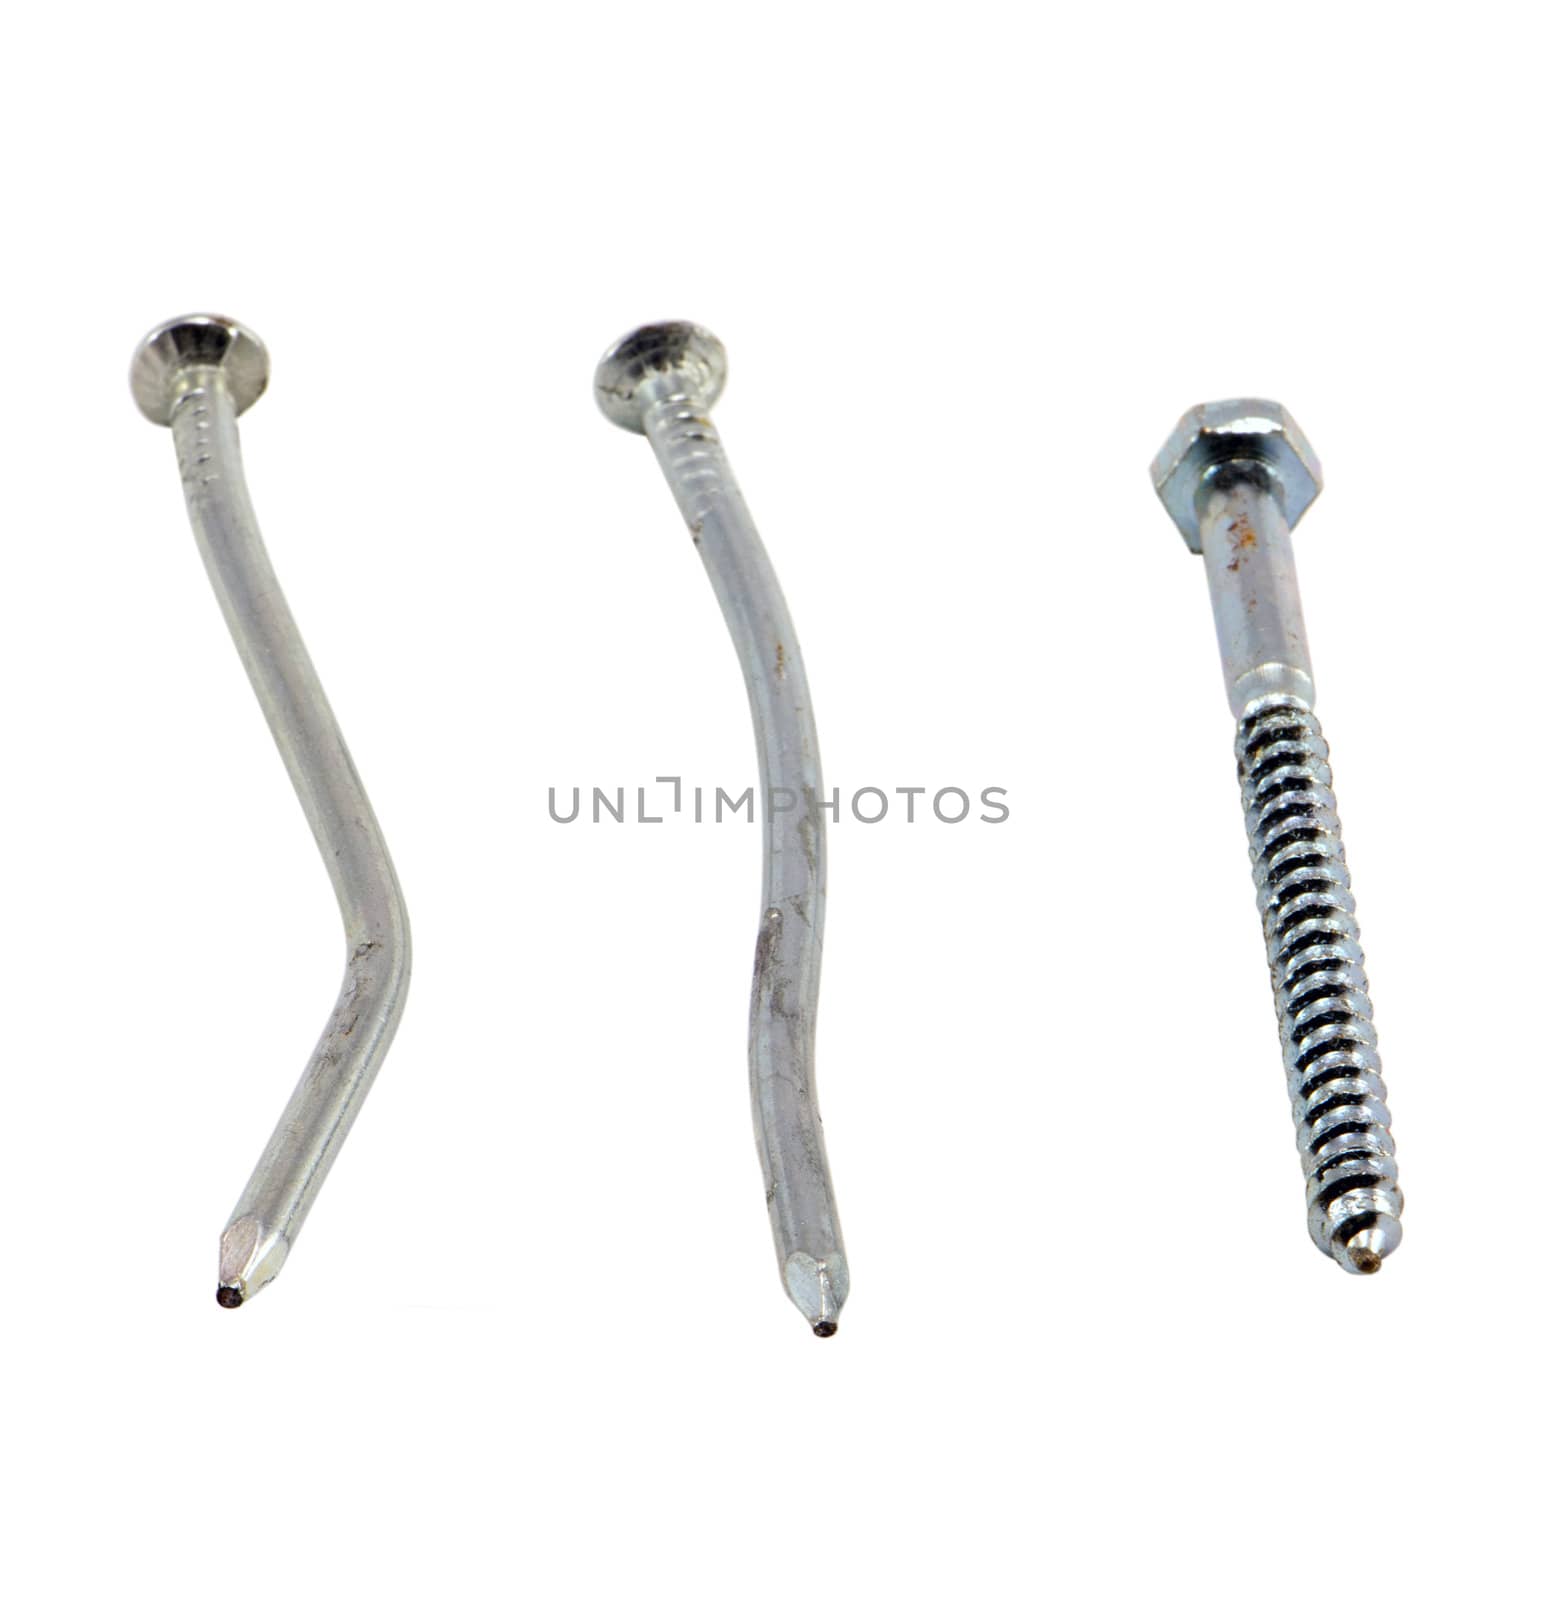 nails hammered bend and screw bolt wrench head isolated on white background.